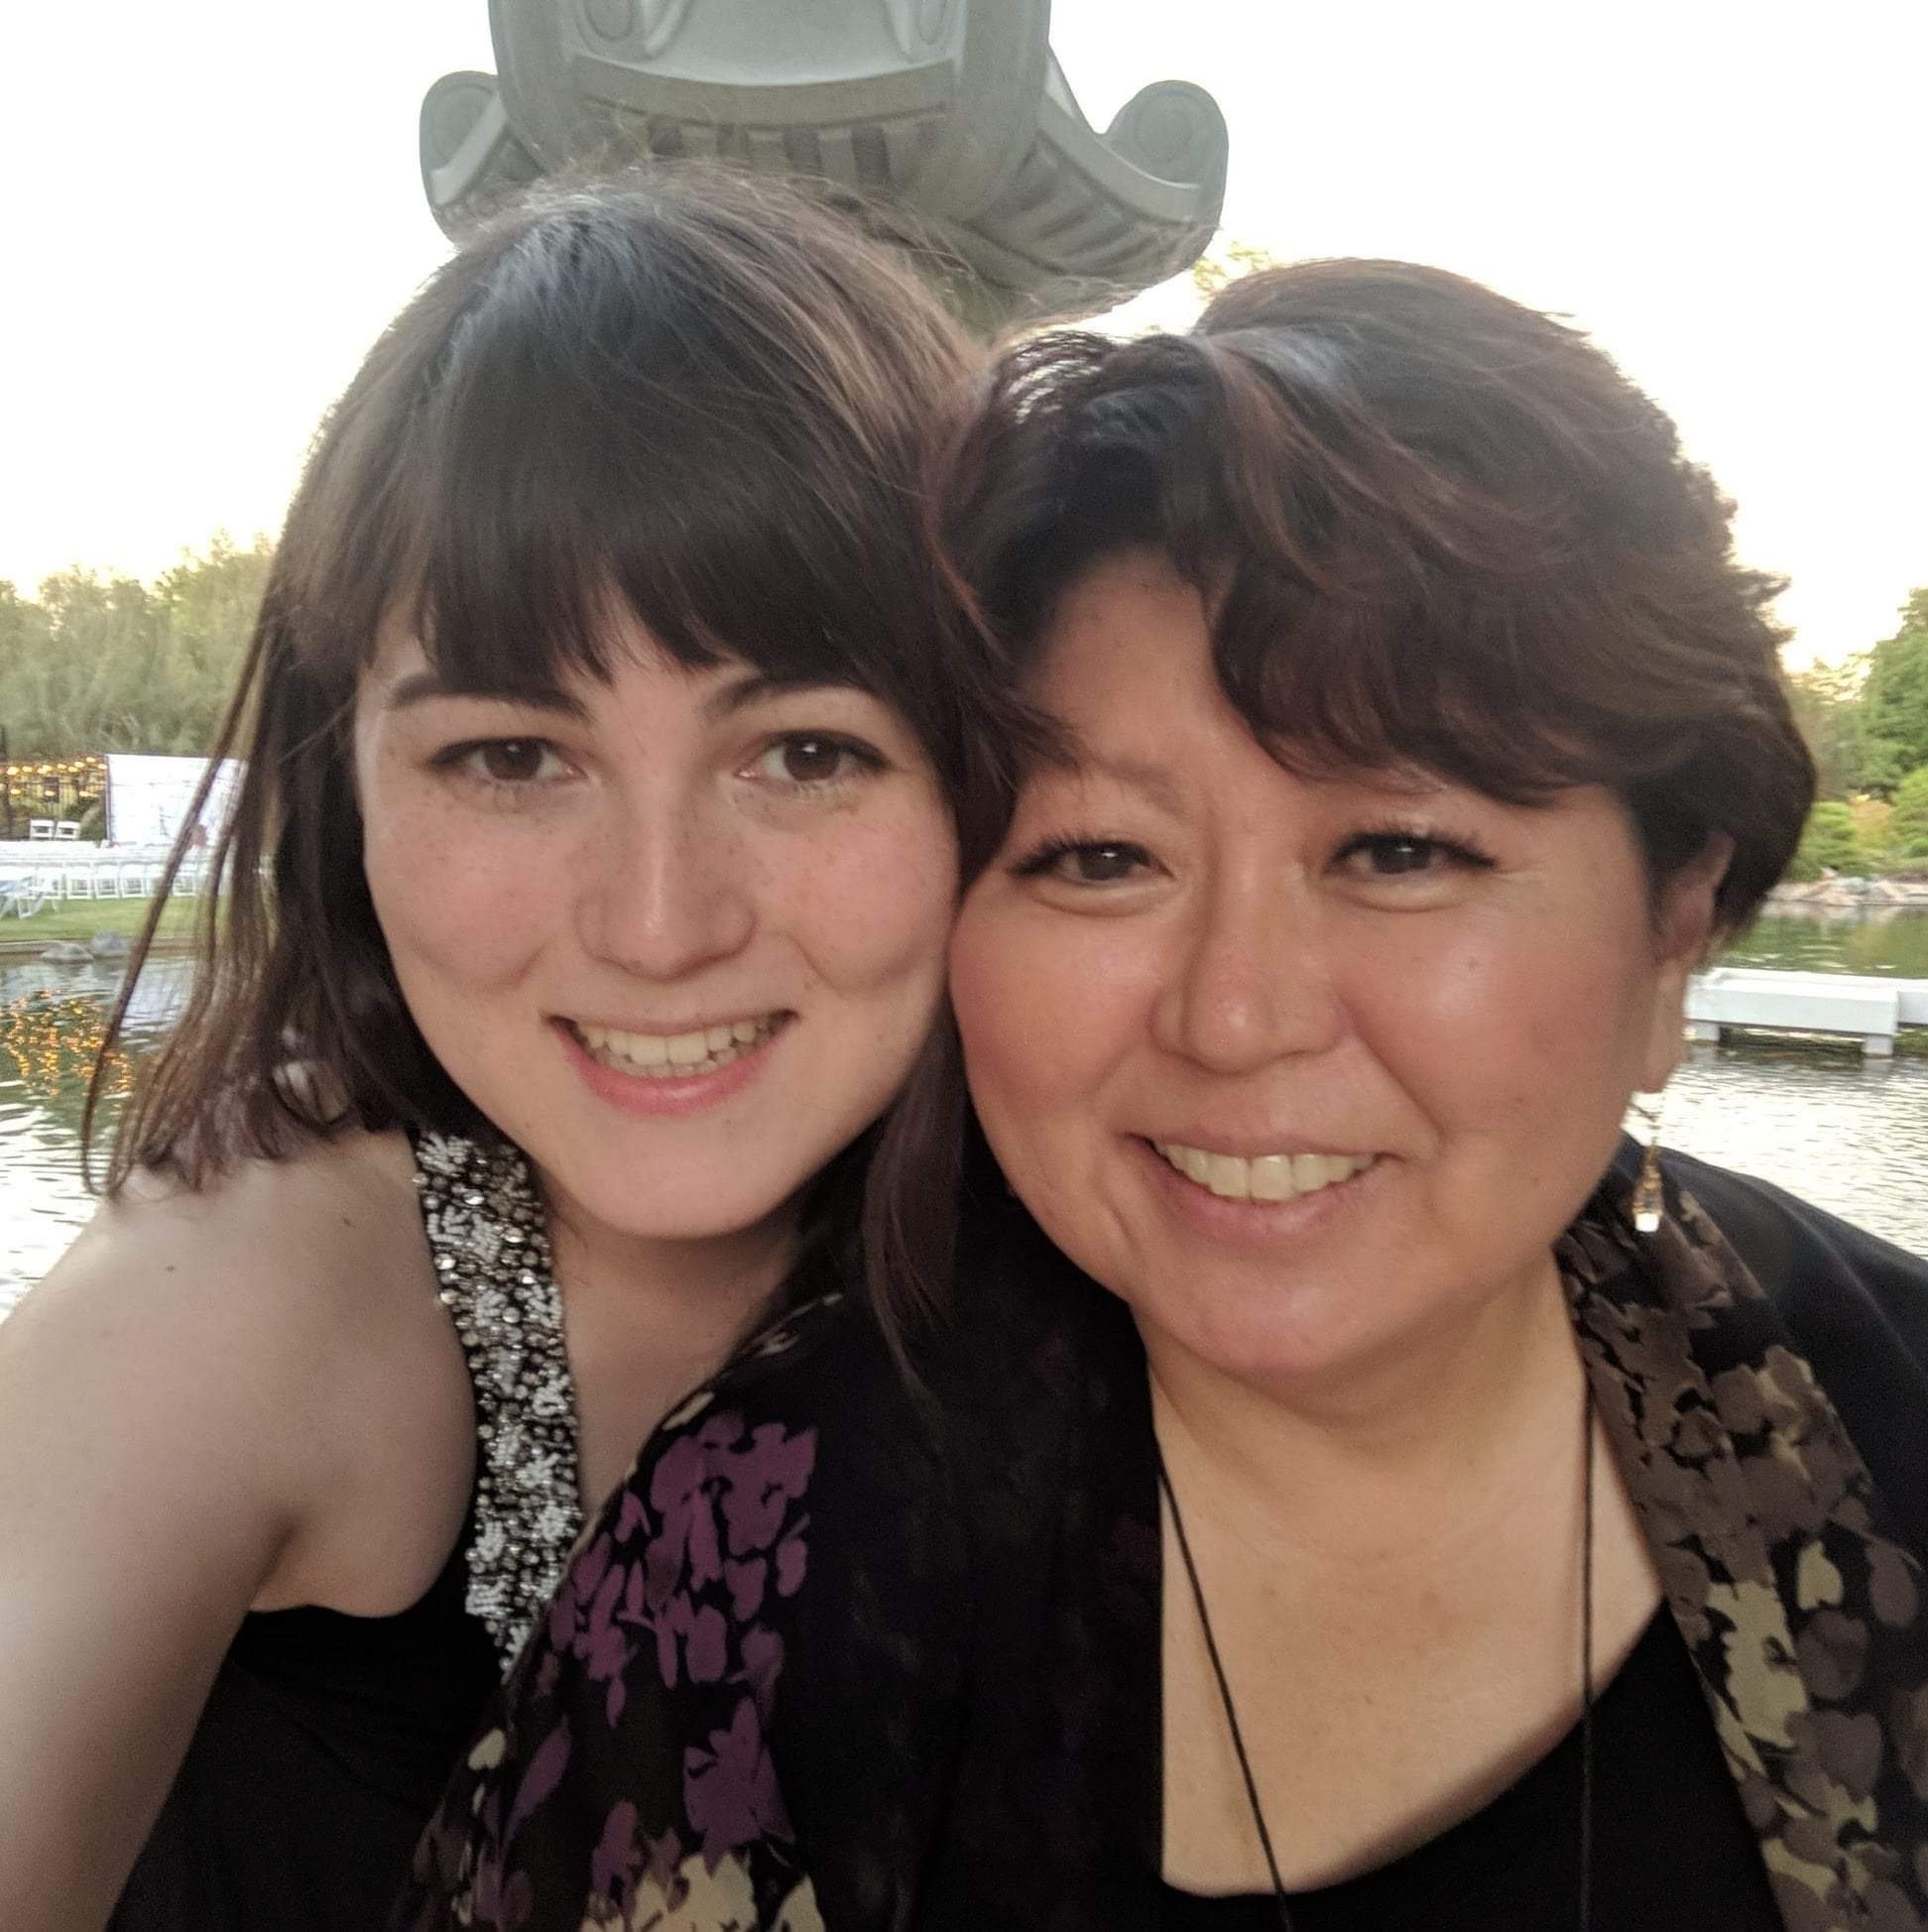 Cindi Kishiyama Harbottle with her daughter Alexis